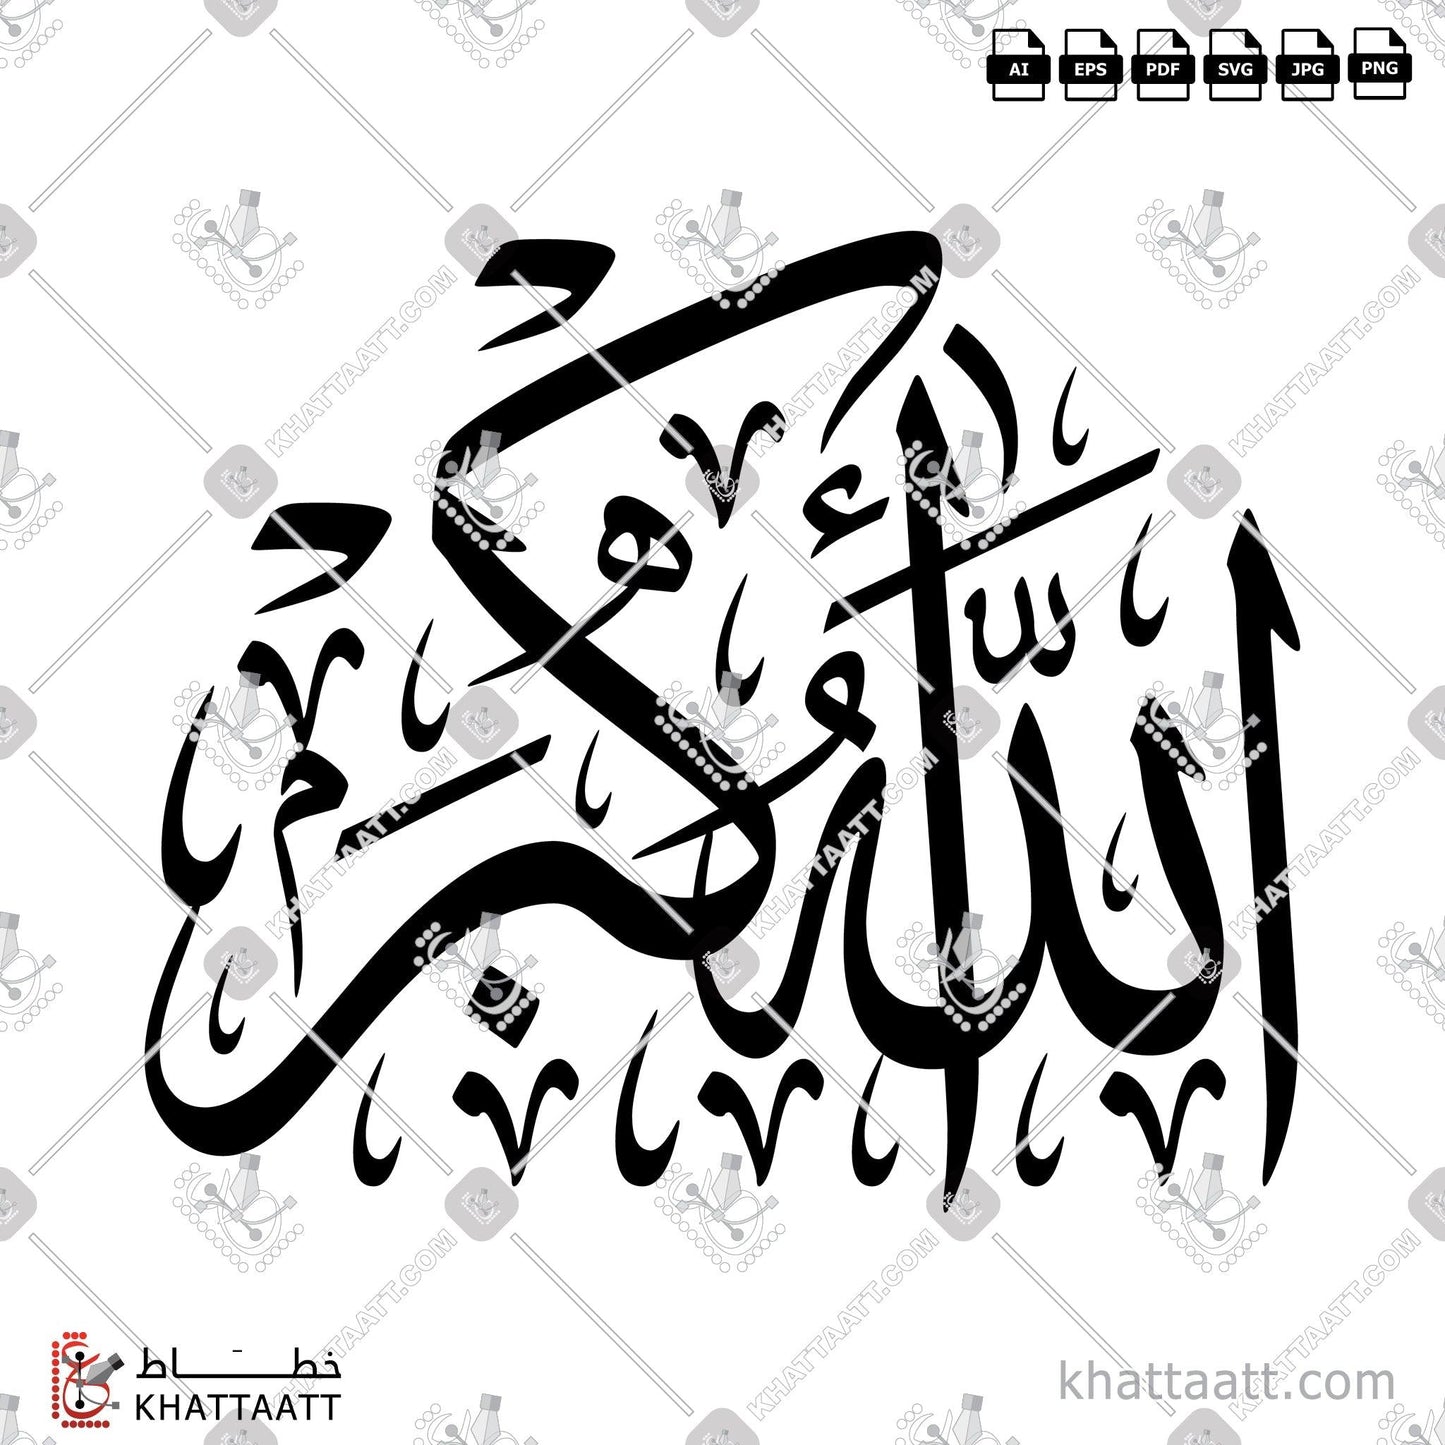 Download Arabic Calligraphy of ALLAHU AKBAR - الله أكبر in Thuluth - خط الثلث in vector and .png